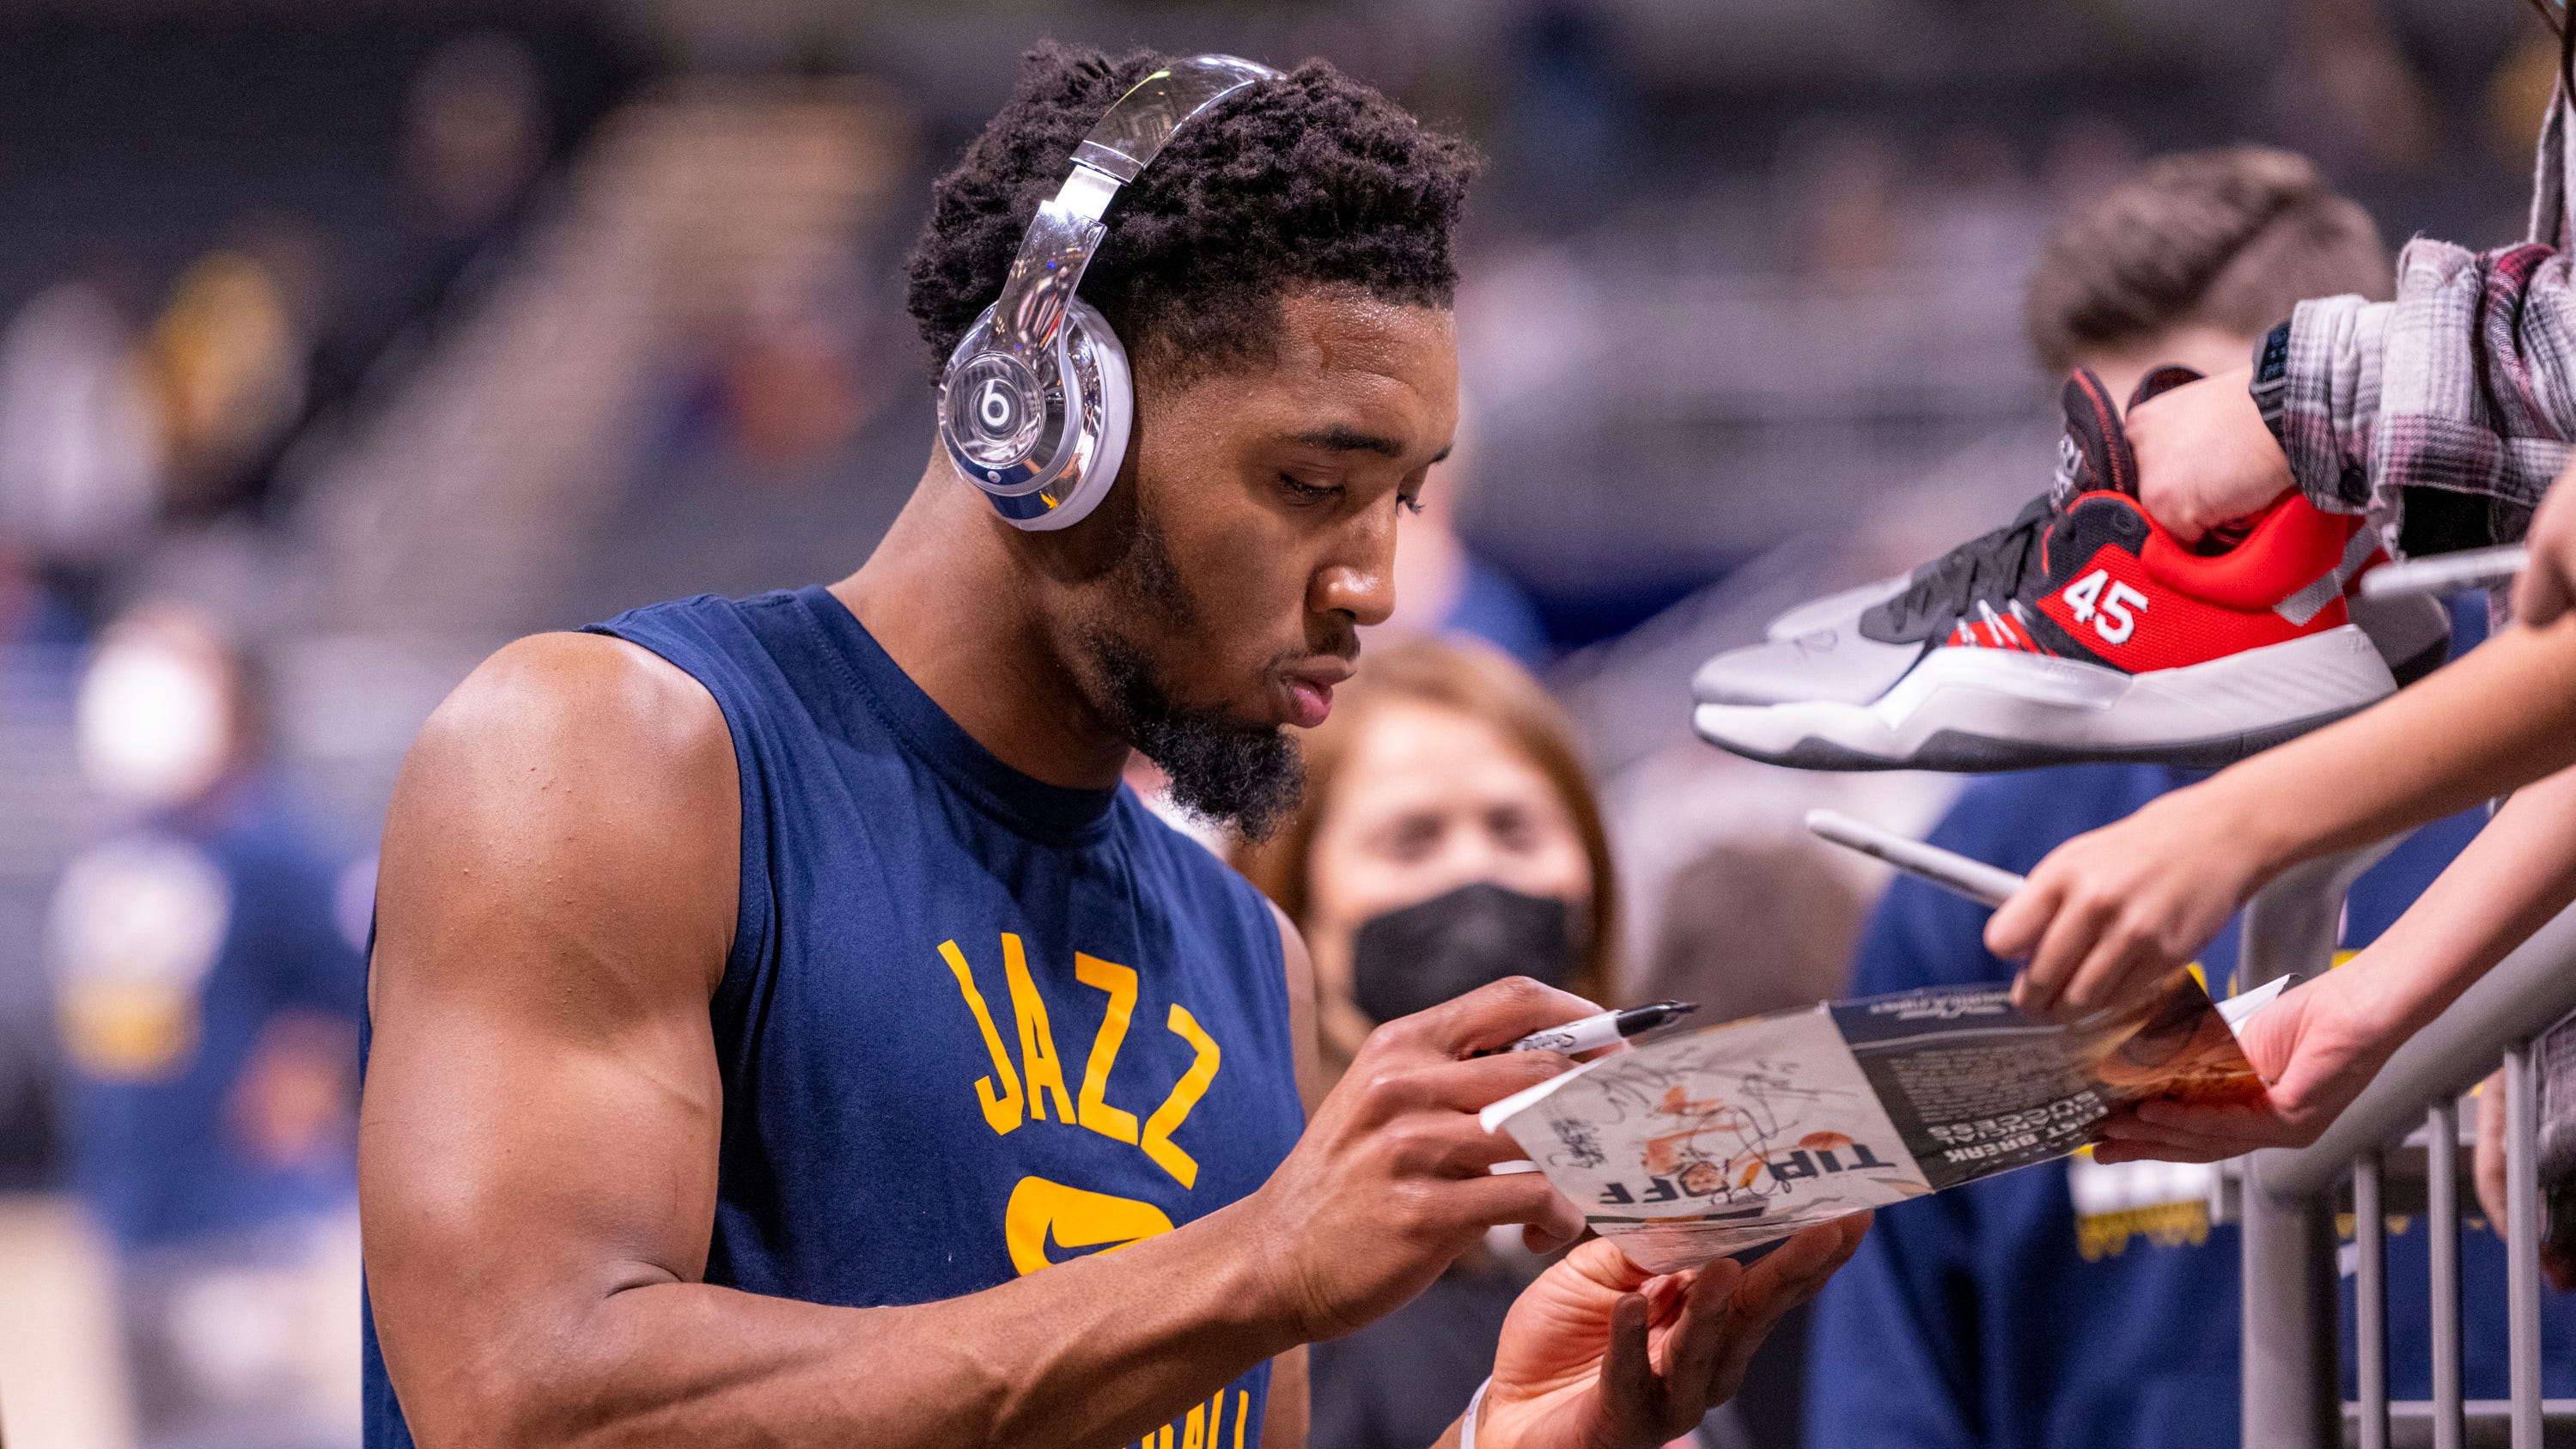 Utah Jazz guard Donovan Mitchell (45) gives an autograph for a fan as he leaves the court after warming up before an NBA basketball game against the Indiana Pacers in Indianapolis, Saturday, Jan. 8, 2022. (AP Photo/Doug McSchooler).